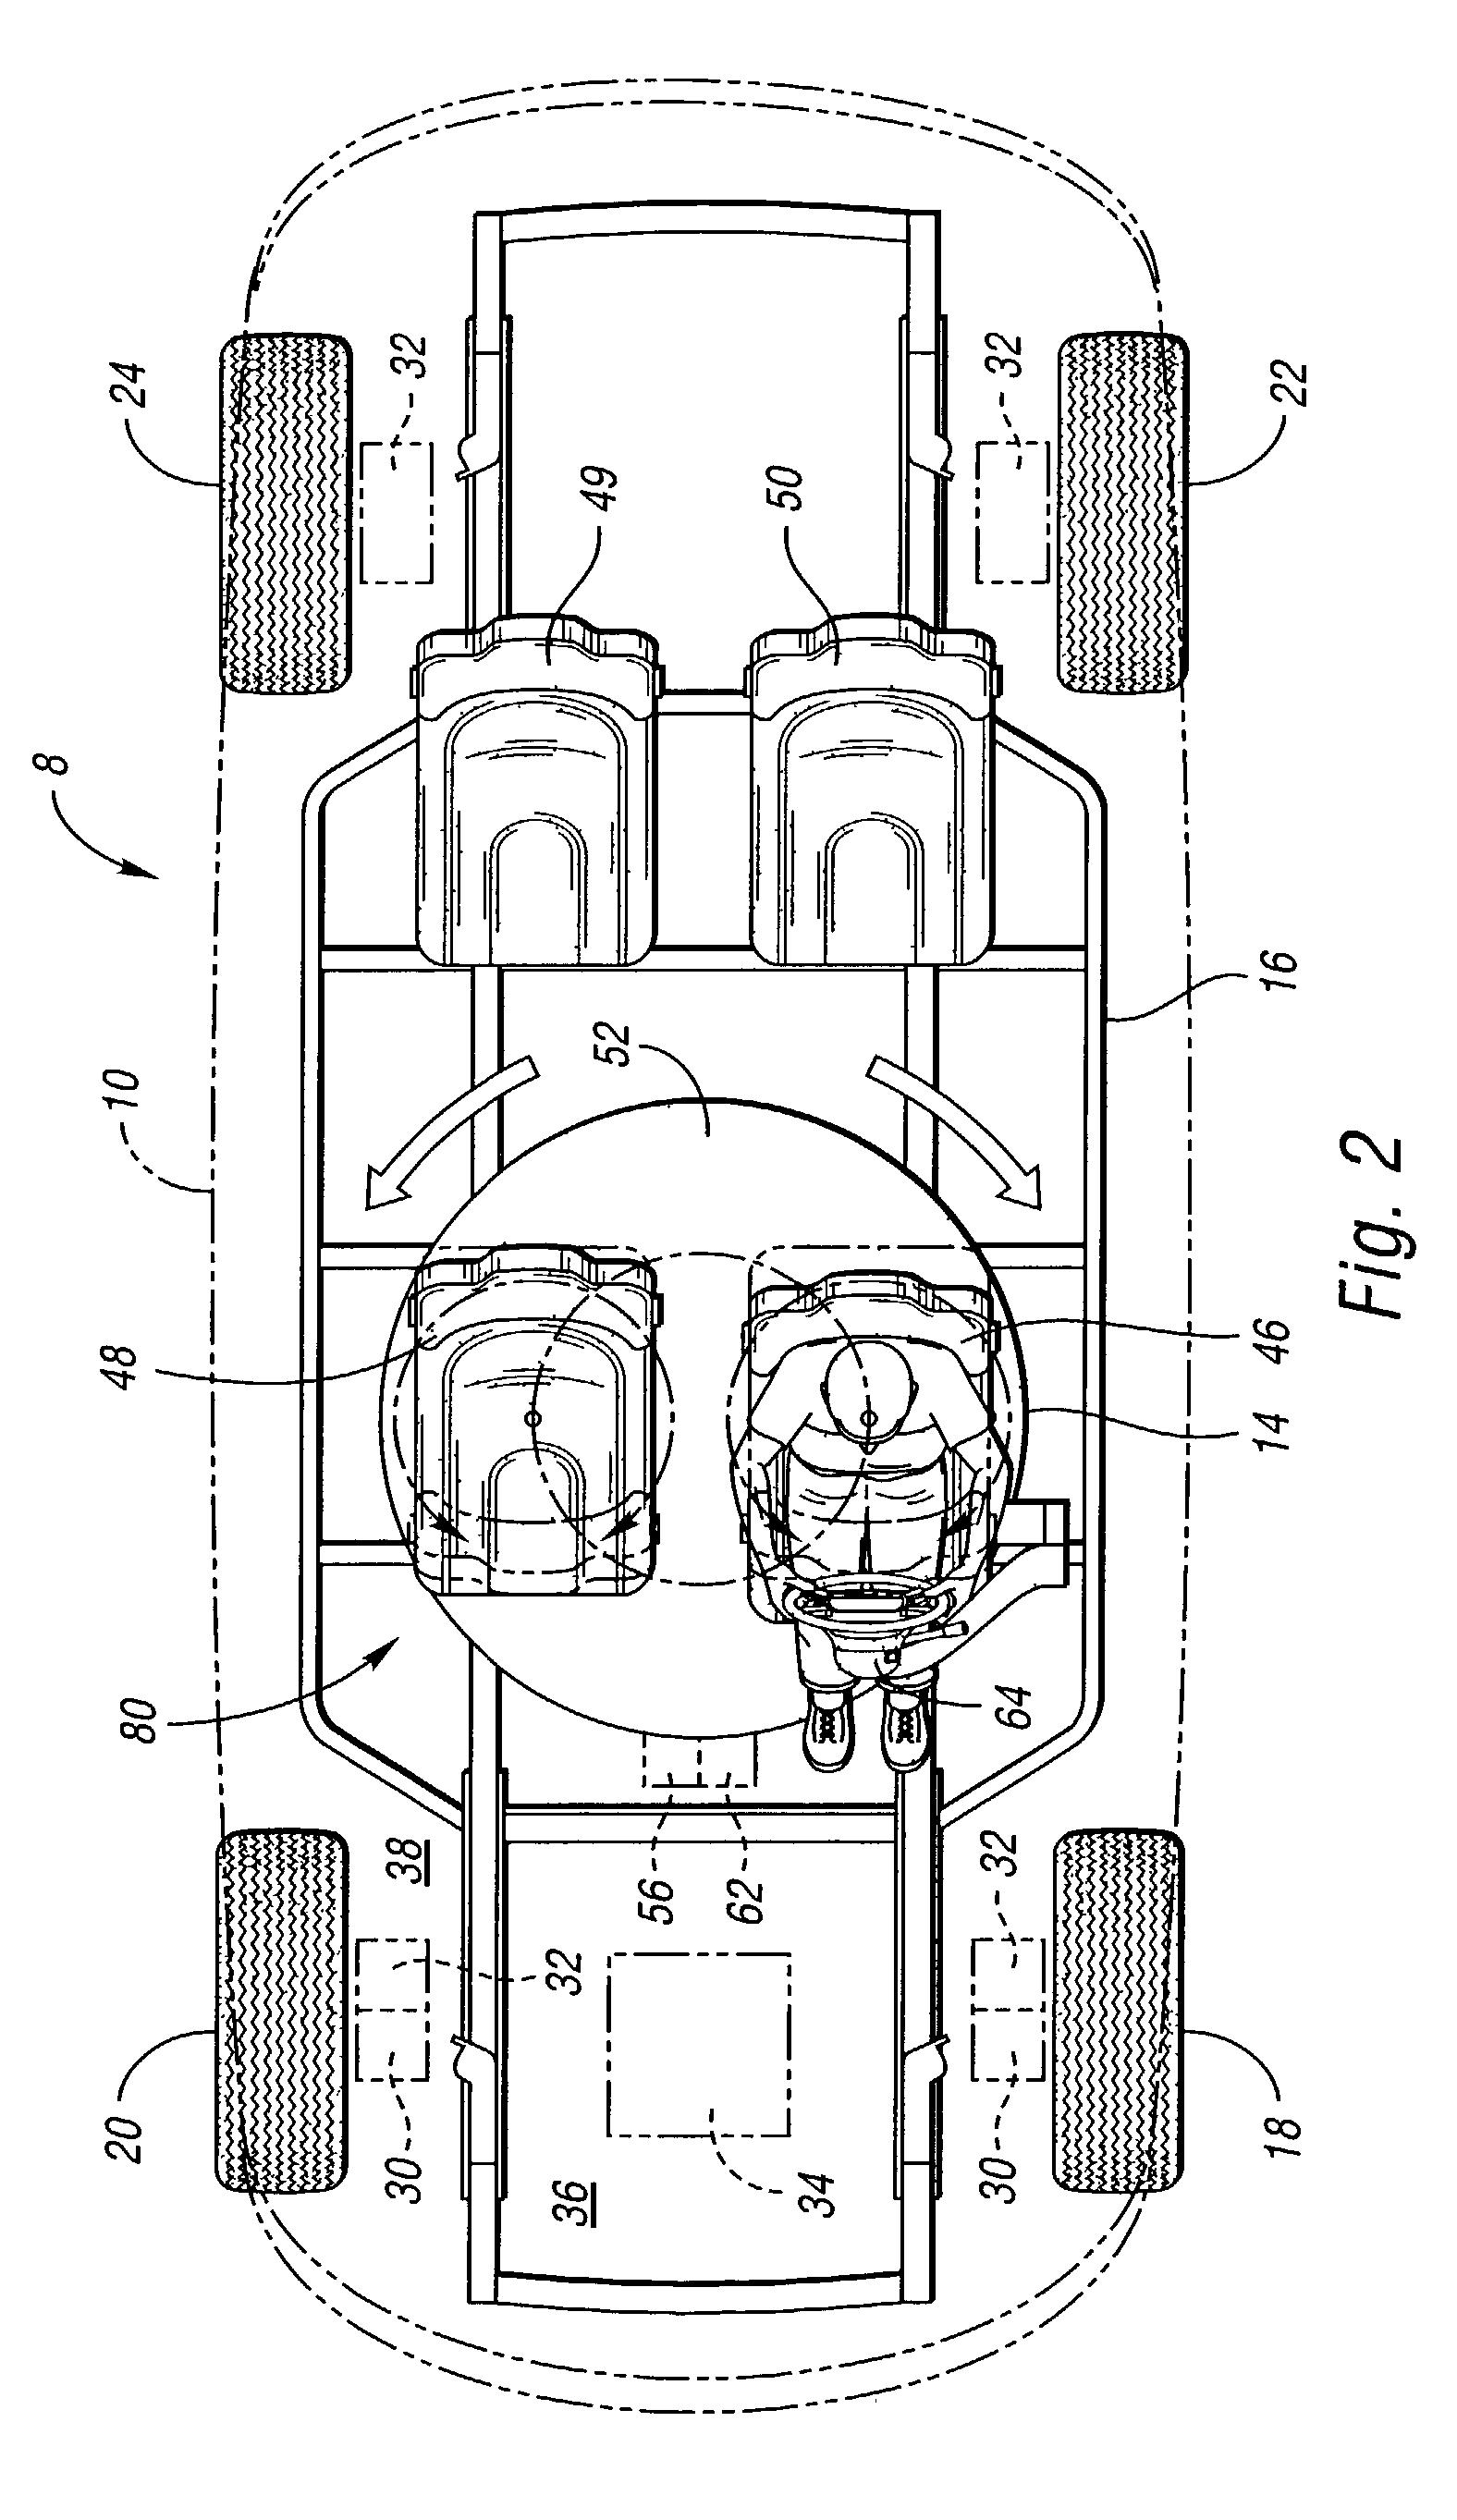 Vehicle having a movable driving position